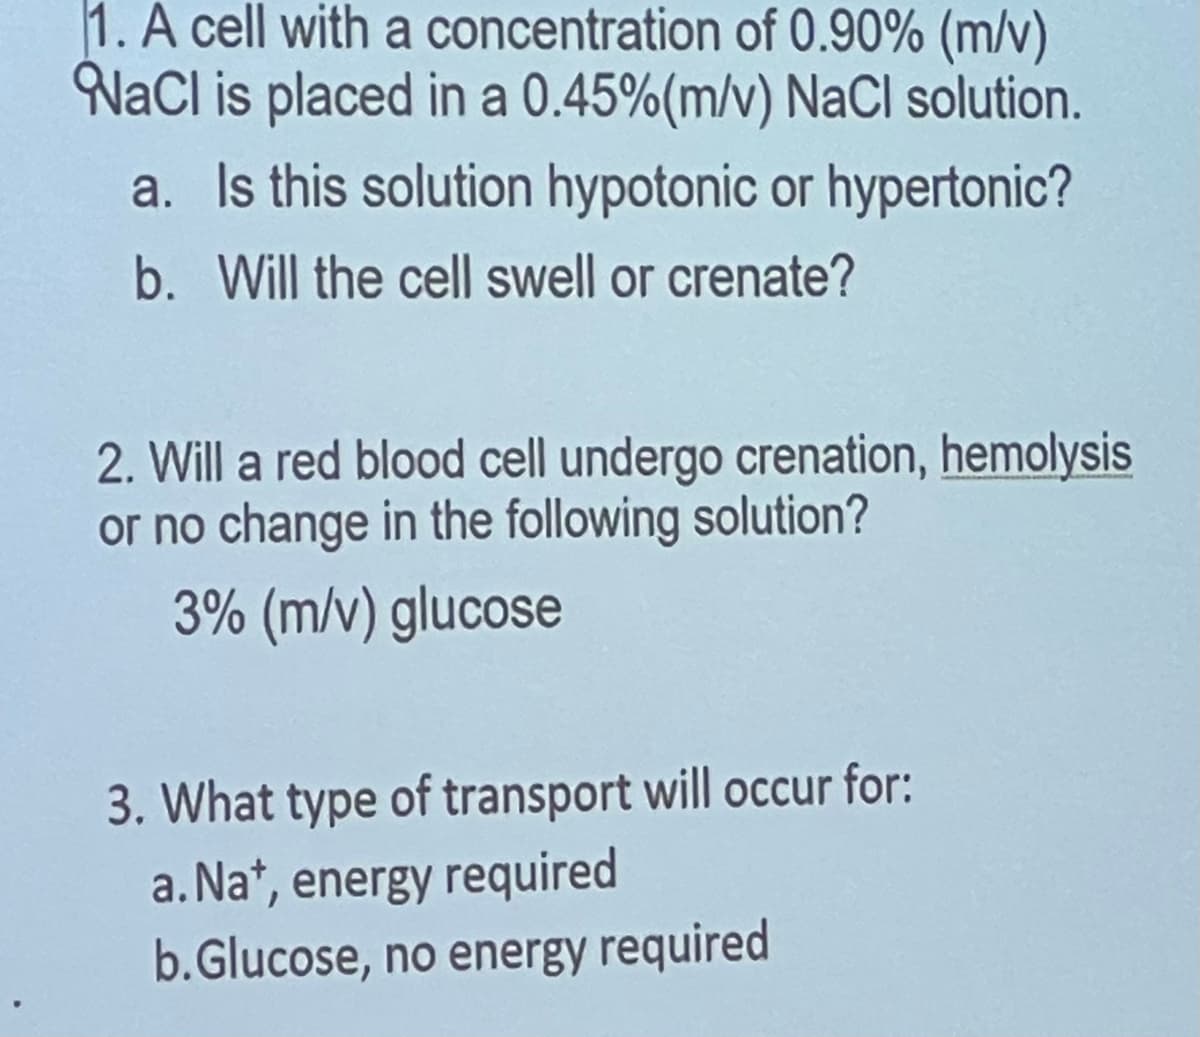 1. A cell with a
concentration of 0.90% (m/v)
NaCl is placed in a 0.45% (m/v) NaCl solution.
a. Is this solution hypotonic or hypertonic?
b. Will the cell swell or crenate?
2. Will a red blood cell undergo crenation, hemolysis
or no change in the following solution?
3% (m/v) glucose
3. What type of transport will occur for:
a. Na+, energy required
b.Glucose, no energy required